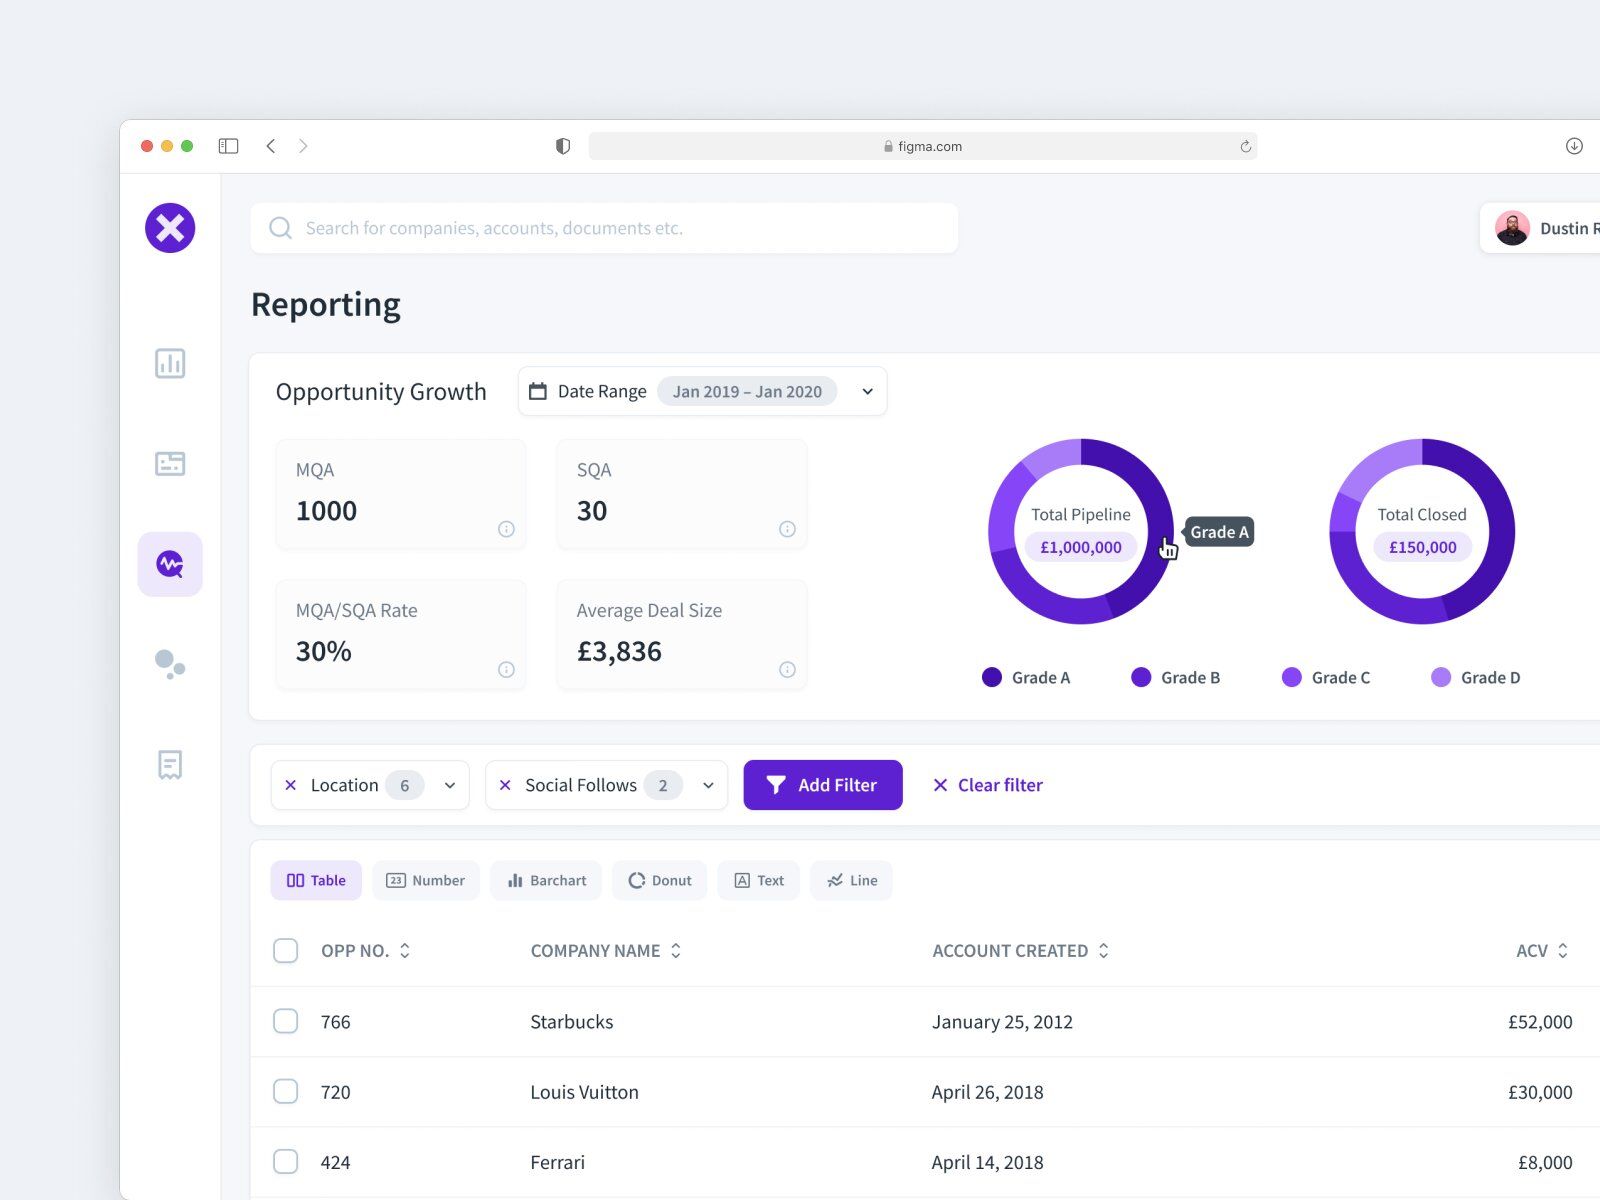 Accounting software can be a great addition to your company’s accounting system since you can generate reports and share them digitally (*image by [Ga Huy ▲](https://dribbble.com/gahuy){ rel="nofollow" target="_blank" .default-md}*)